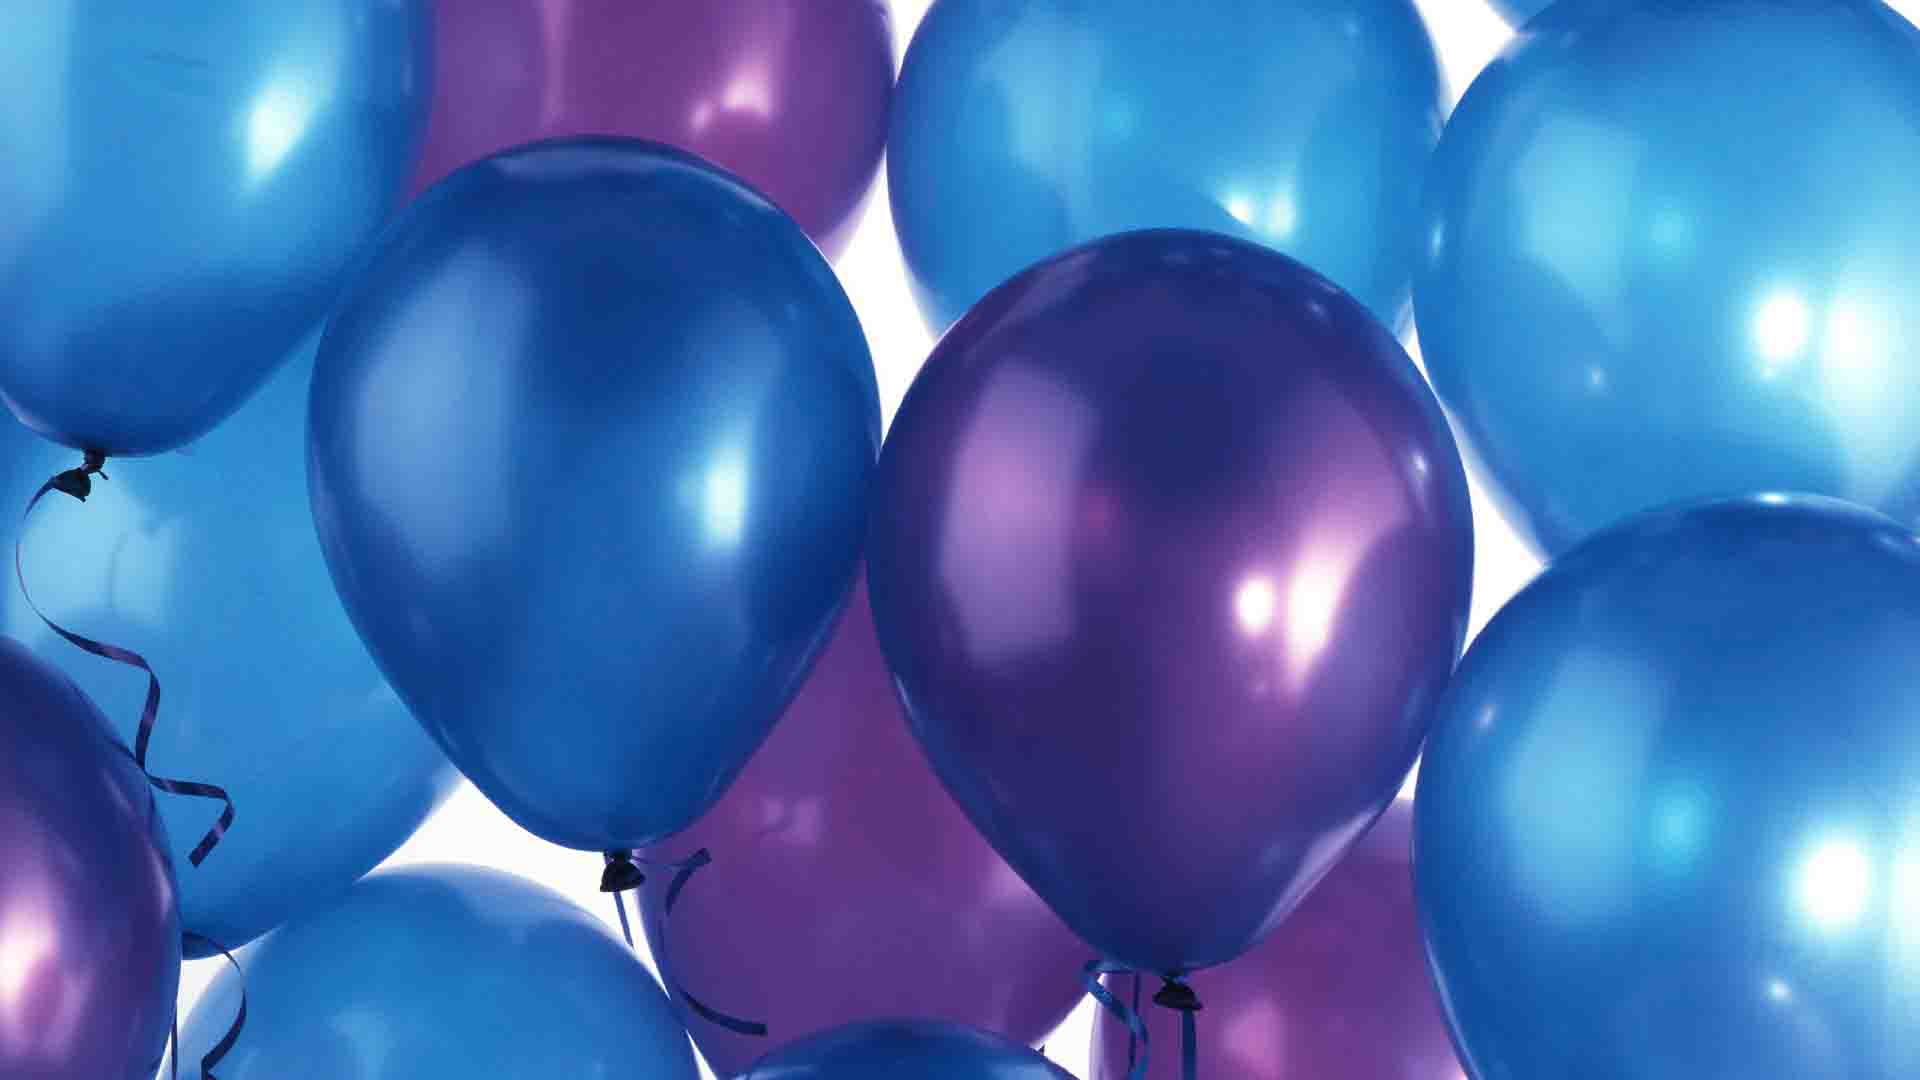 Purple and blue balloons